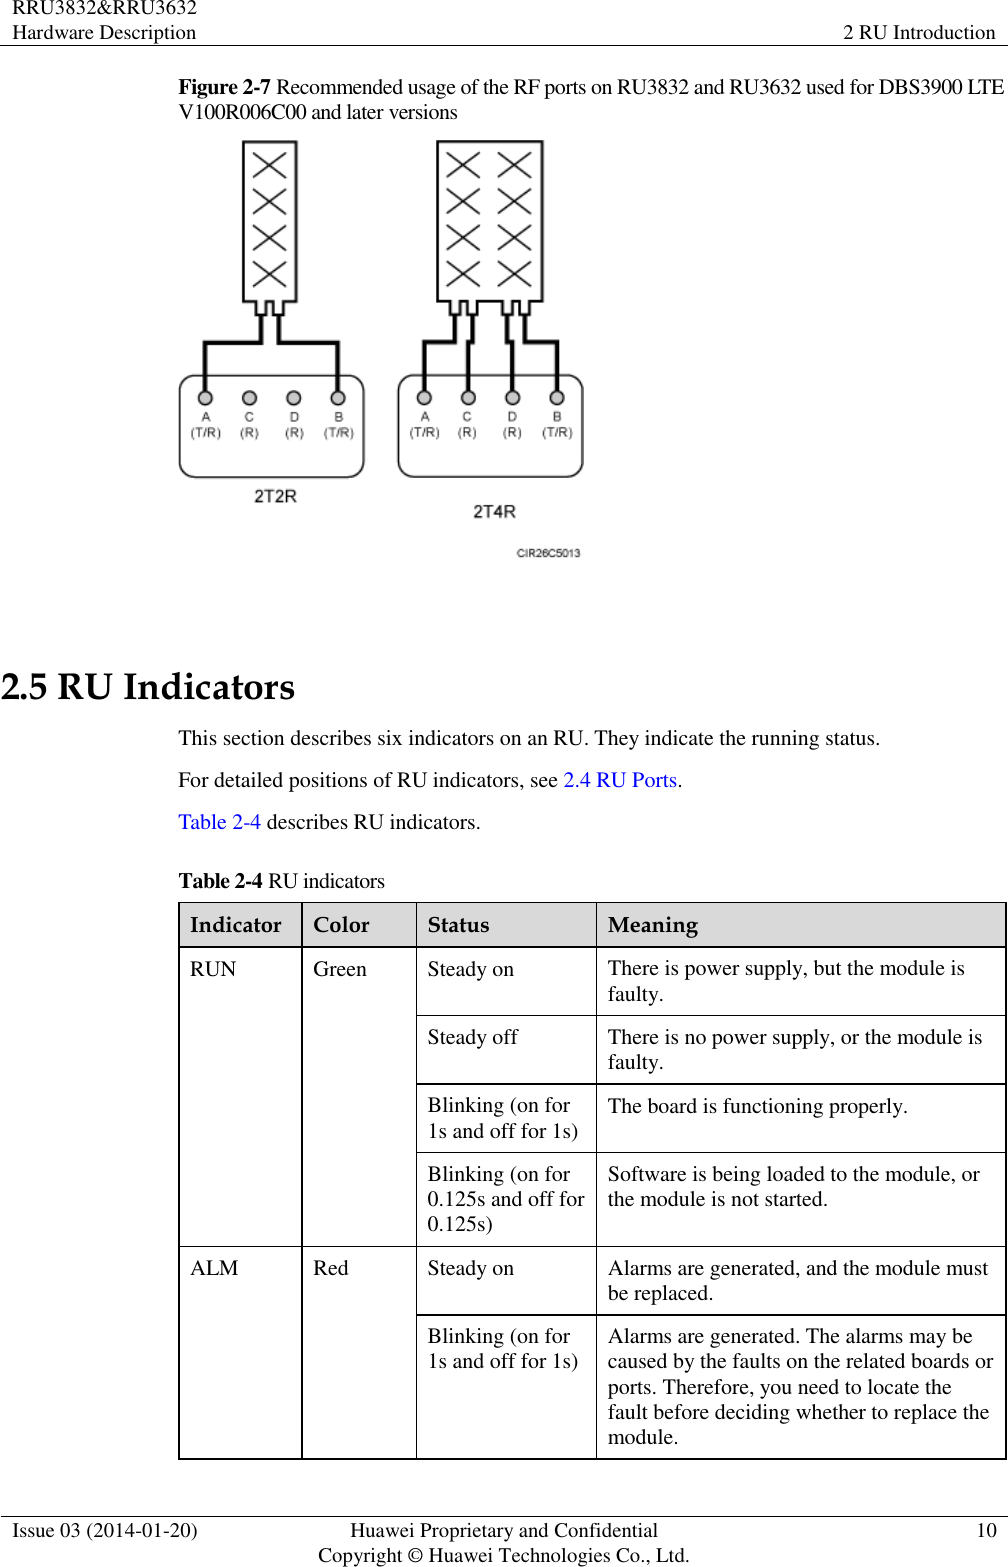 RRU3832&amp;RRU3632 Hardware Description 2 RU Introduction  Issue 03 (2014-01-20) Huawei Proprietary and Confidential                                     Copyright © Huawei Technologies Co., Ltd. 10  Figure 2-7 Recommended usage of the RF ports on RU3832 and RU3632 used for DBS3900 LTE V100R006C00 and later versions   2.5 RU Indicators This section describes six indicators on an RU. They indicate the running status.   For detailed positions of RU indicators, see 2.4 RU Ports. Table 2-4 describes RU indicators. Table 2-4 RU indicators Indicator Color Status Meaning RUN Green Steady on There is power supply, but the module is faulty. Steady off There is no power supply, or the module is faulty. Blinking (on for 1s and off for 1s) The board is functioning properly. Blinking (on for 0.125s and off for 0.125s) Software is being loaded to the module, or the module is not started. ALM Red Steady on Alarms are generated, and the module must be replaced. Blinking (on for 1s and off for 1s) Alarms are generated. The alarms may be caused by the faults on the related boards or ports. Therefore, you need to locate the fault before deciding whether to replace the module. 